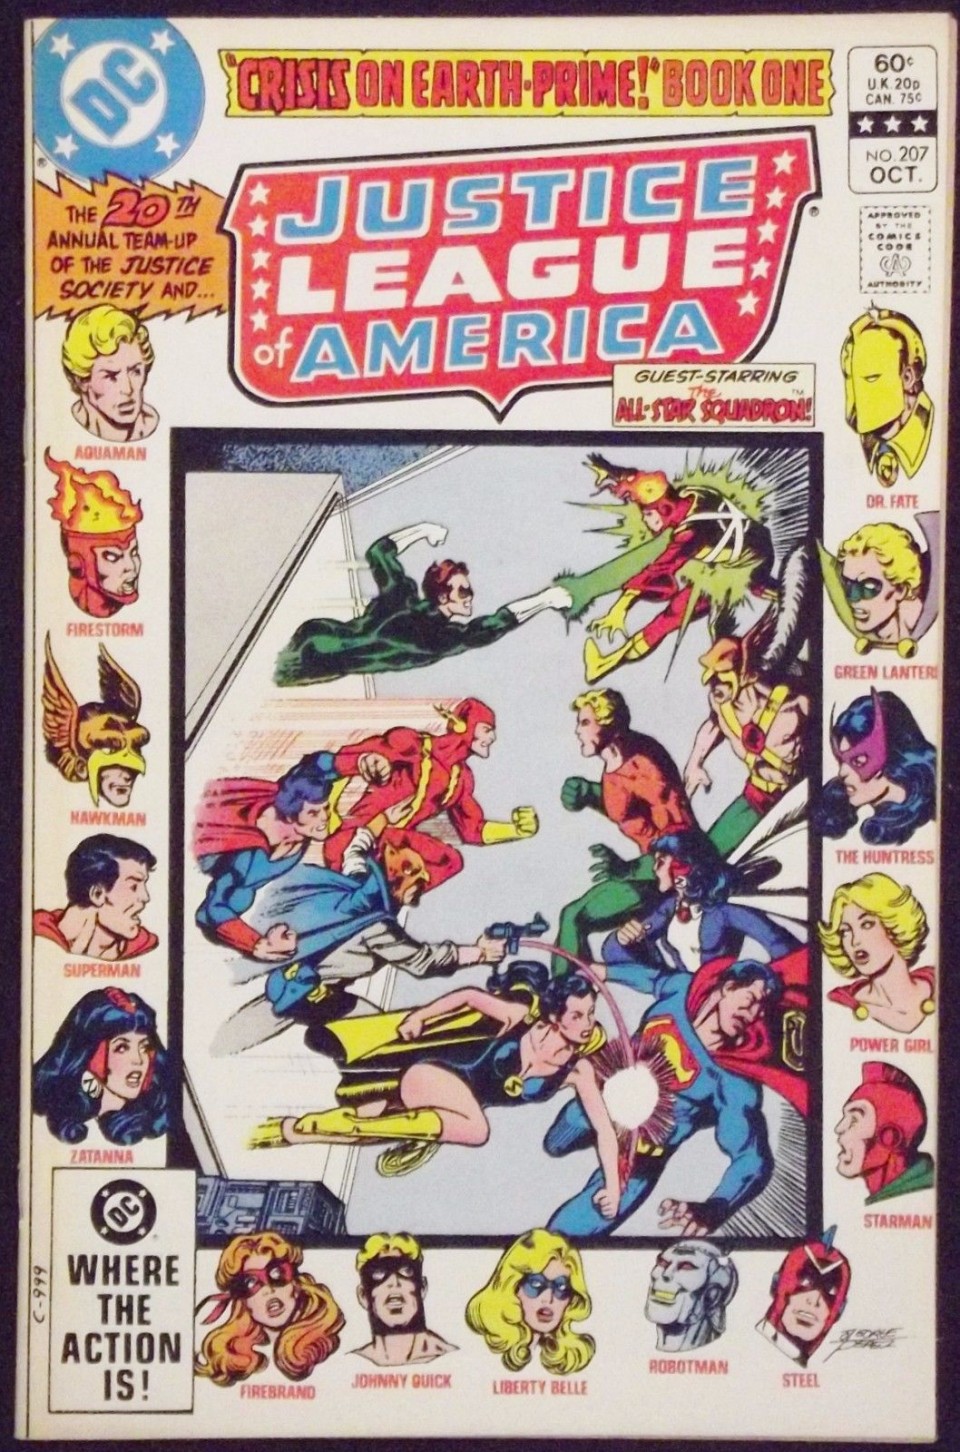 JUSTICE LEAGUE OF AMERICA #207 VF/NM CRISIS ON EARTH PRIME PART ONE ...